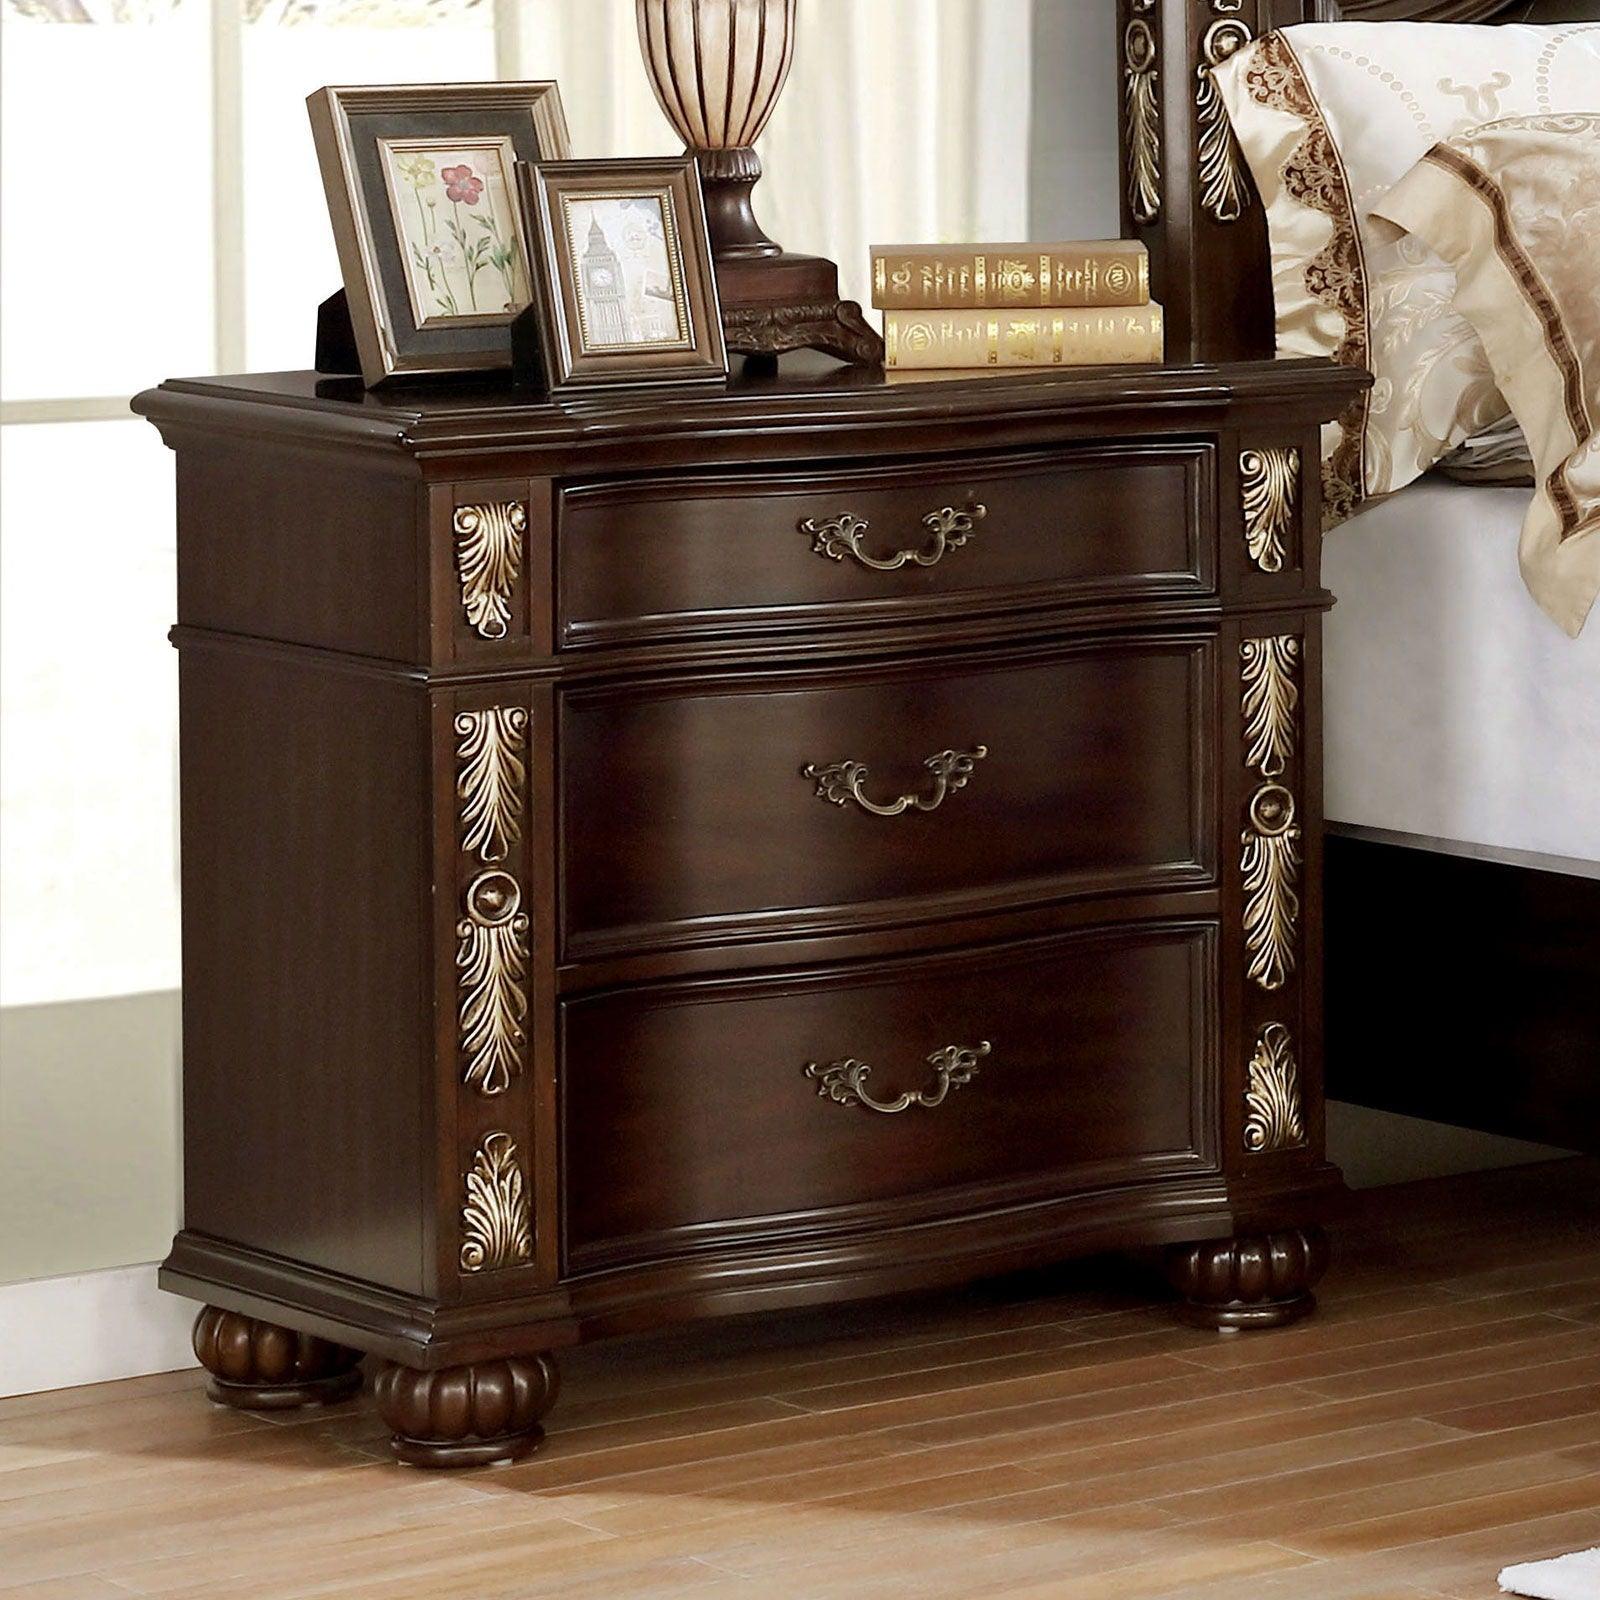 Furniture of America - Theodor - Nightstand With USB Plug - Brown Cherry - 5th Avenue Furniture